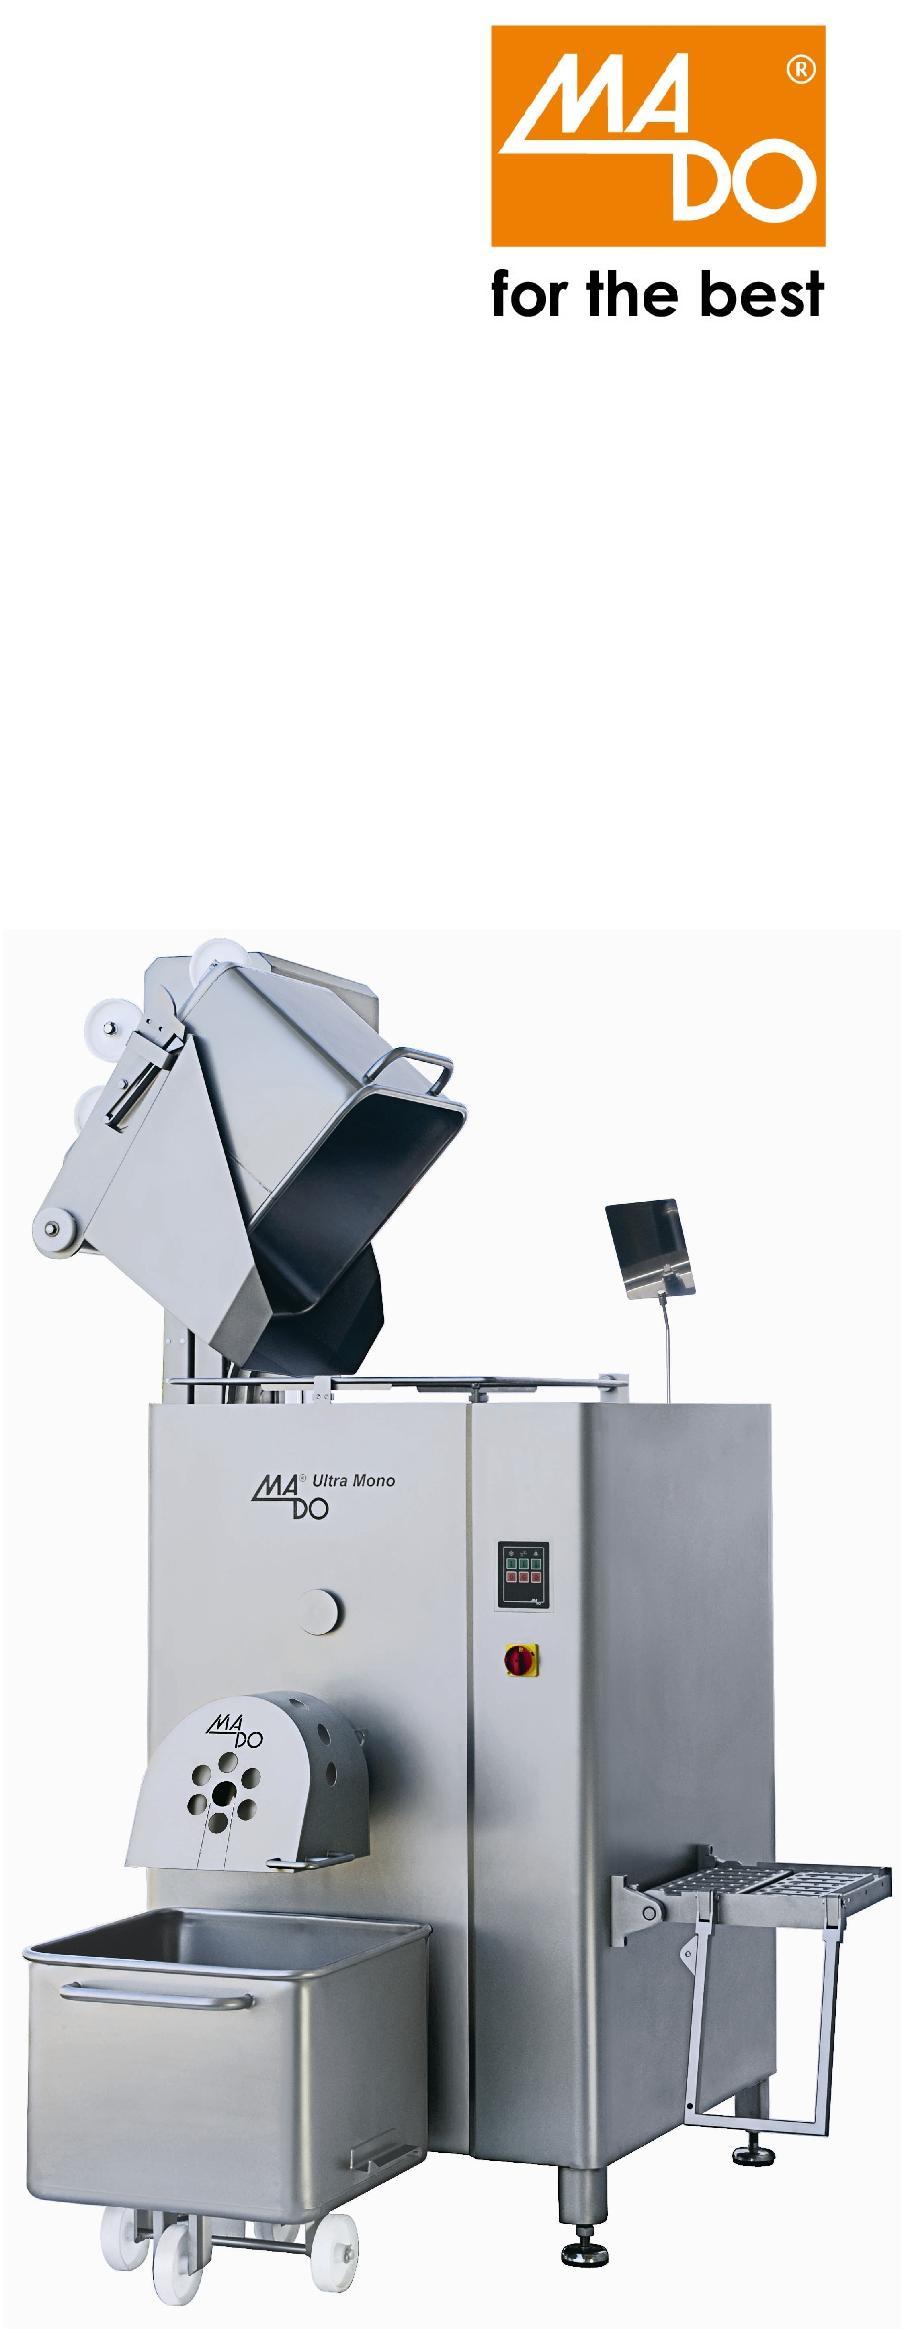 ULTRA MONO MEW 731 E130 Automatic Mixer Grinder 400V, 50 Hz, three-phase, 50 A inert PW 15,0 kw /19,0 kw, MD 1,5kW Also available with lifting device for loading carriage 200 l.